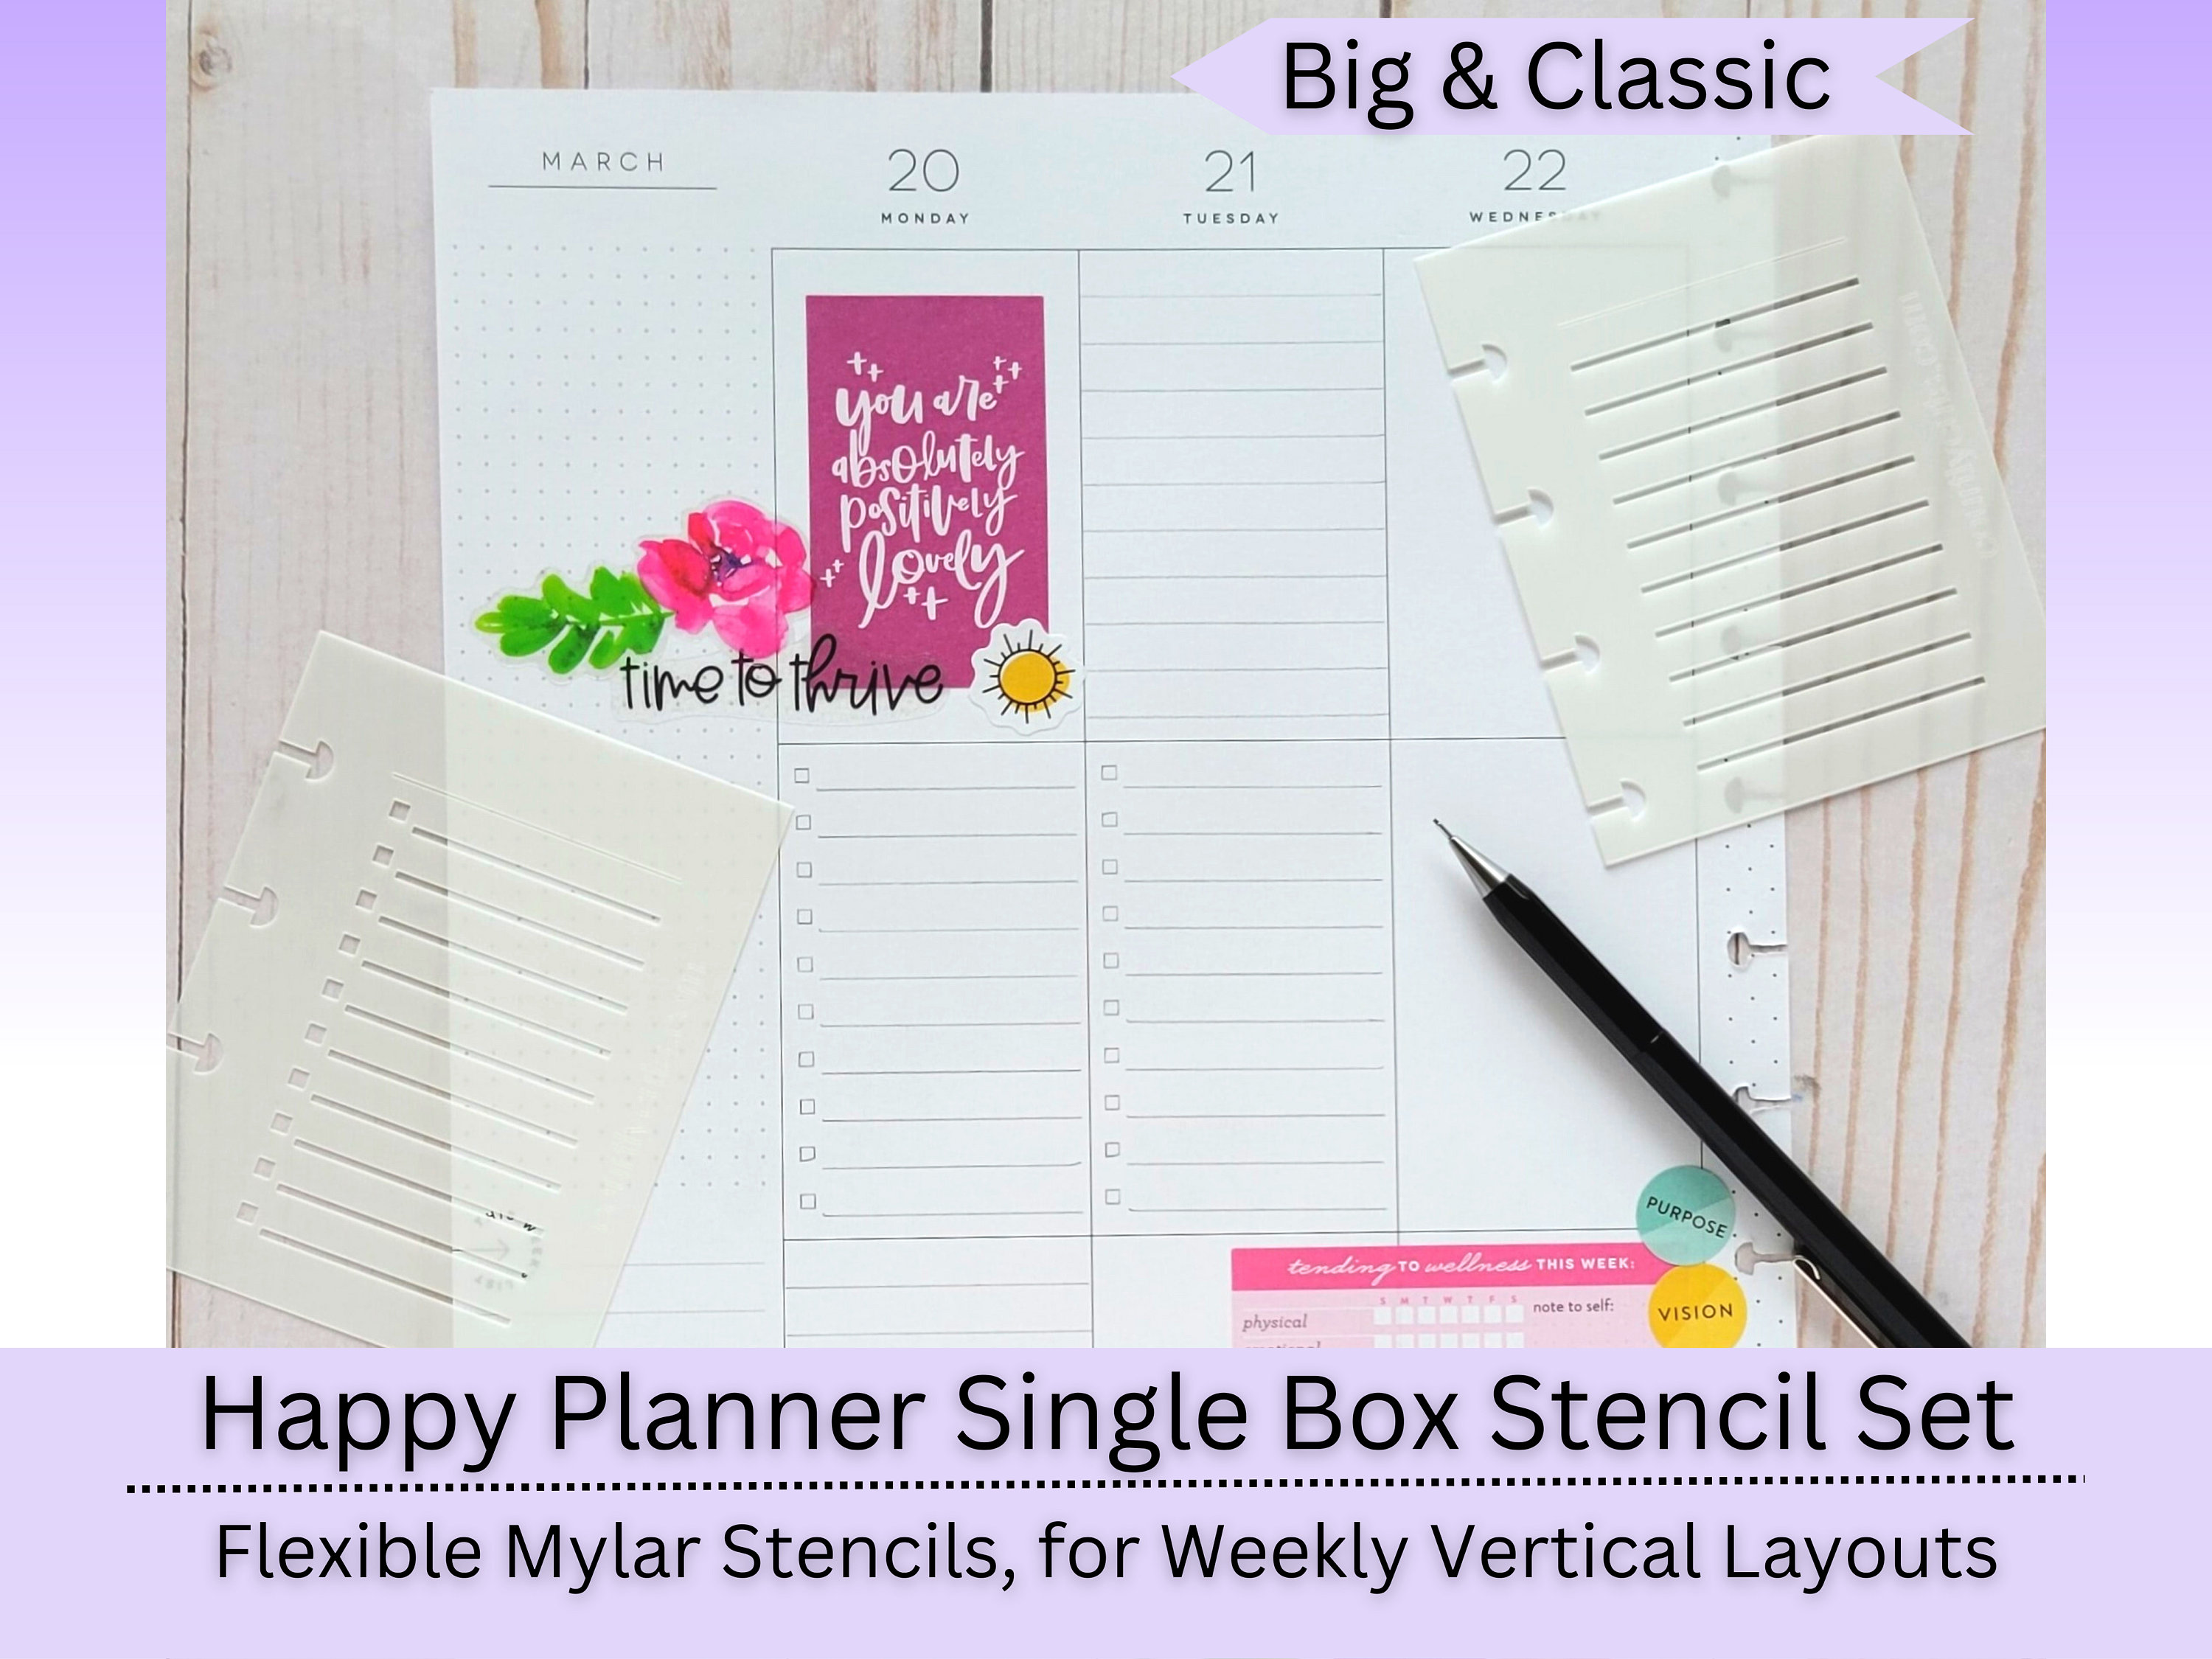 Accessory Packs – The Happy Planner